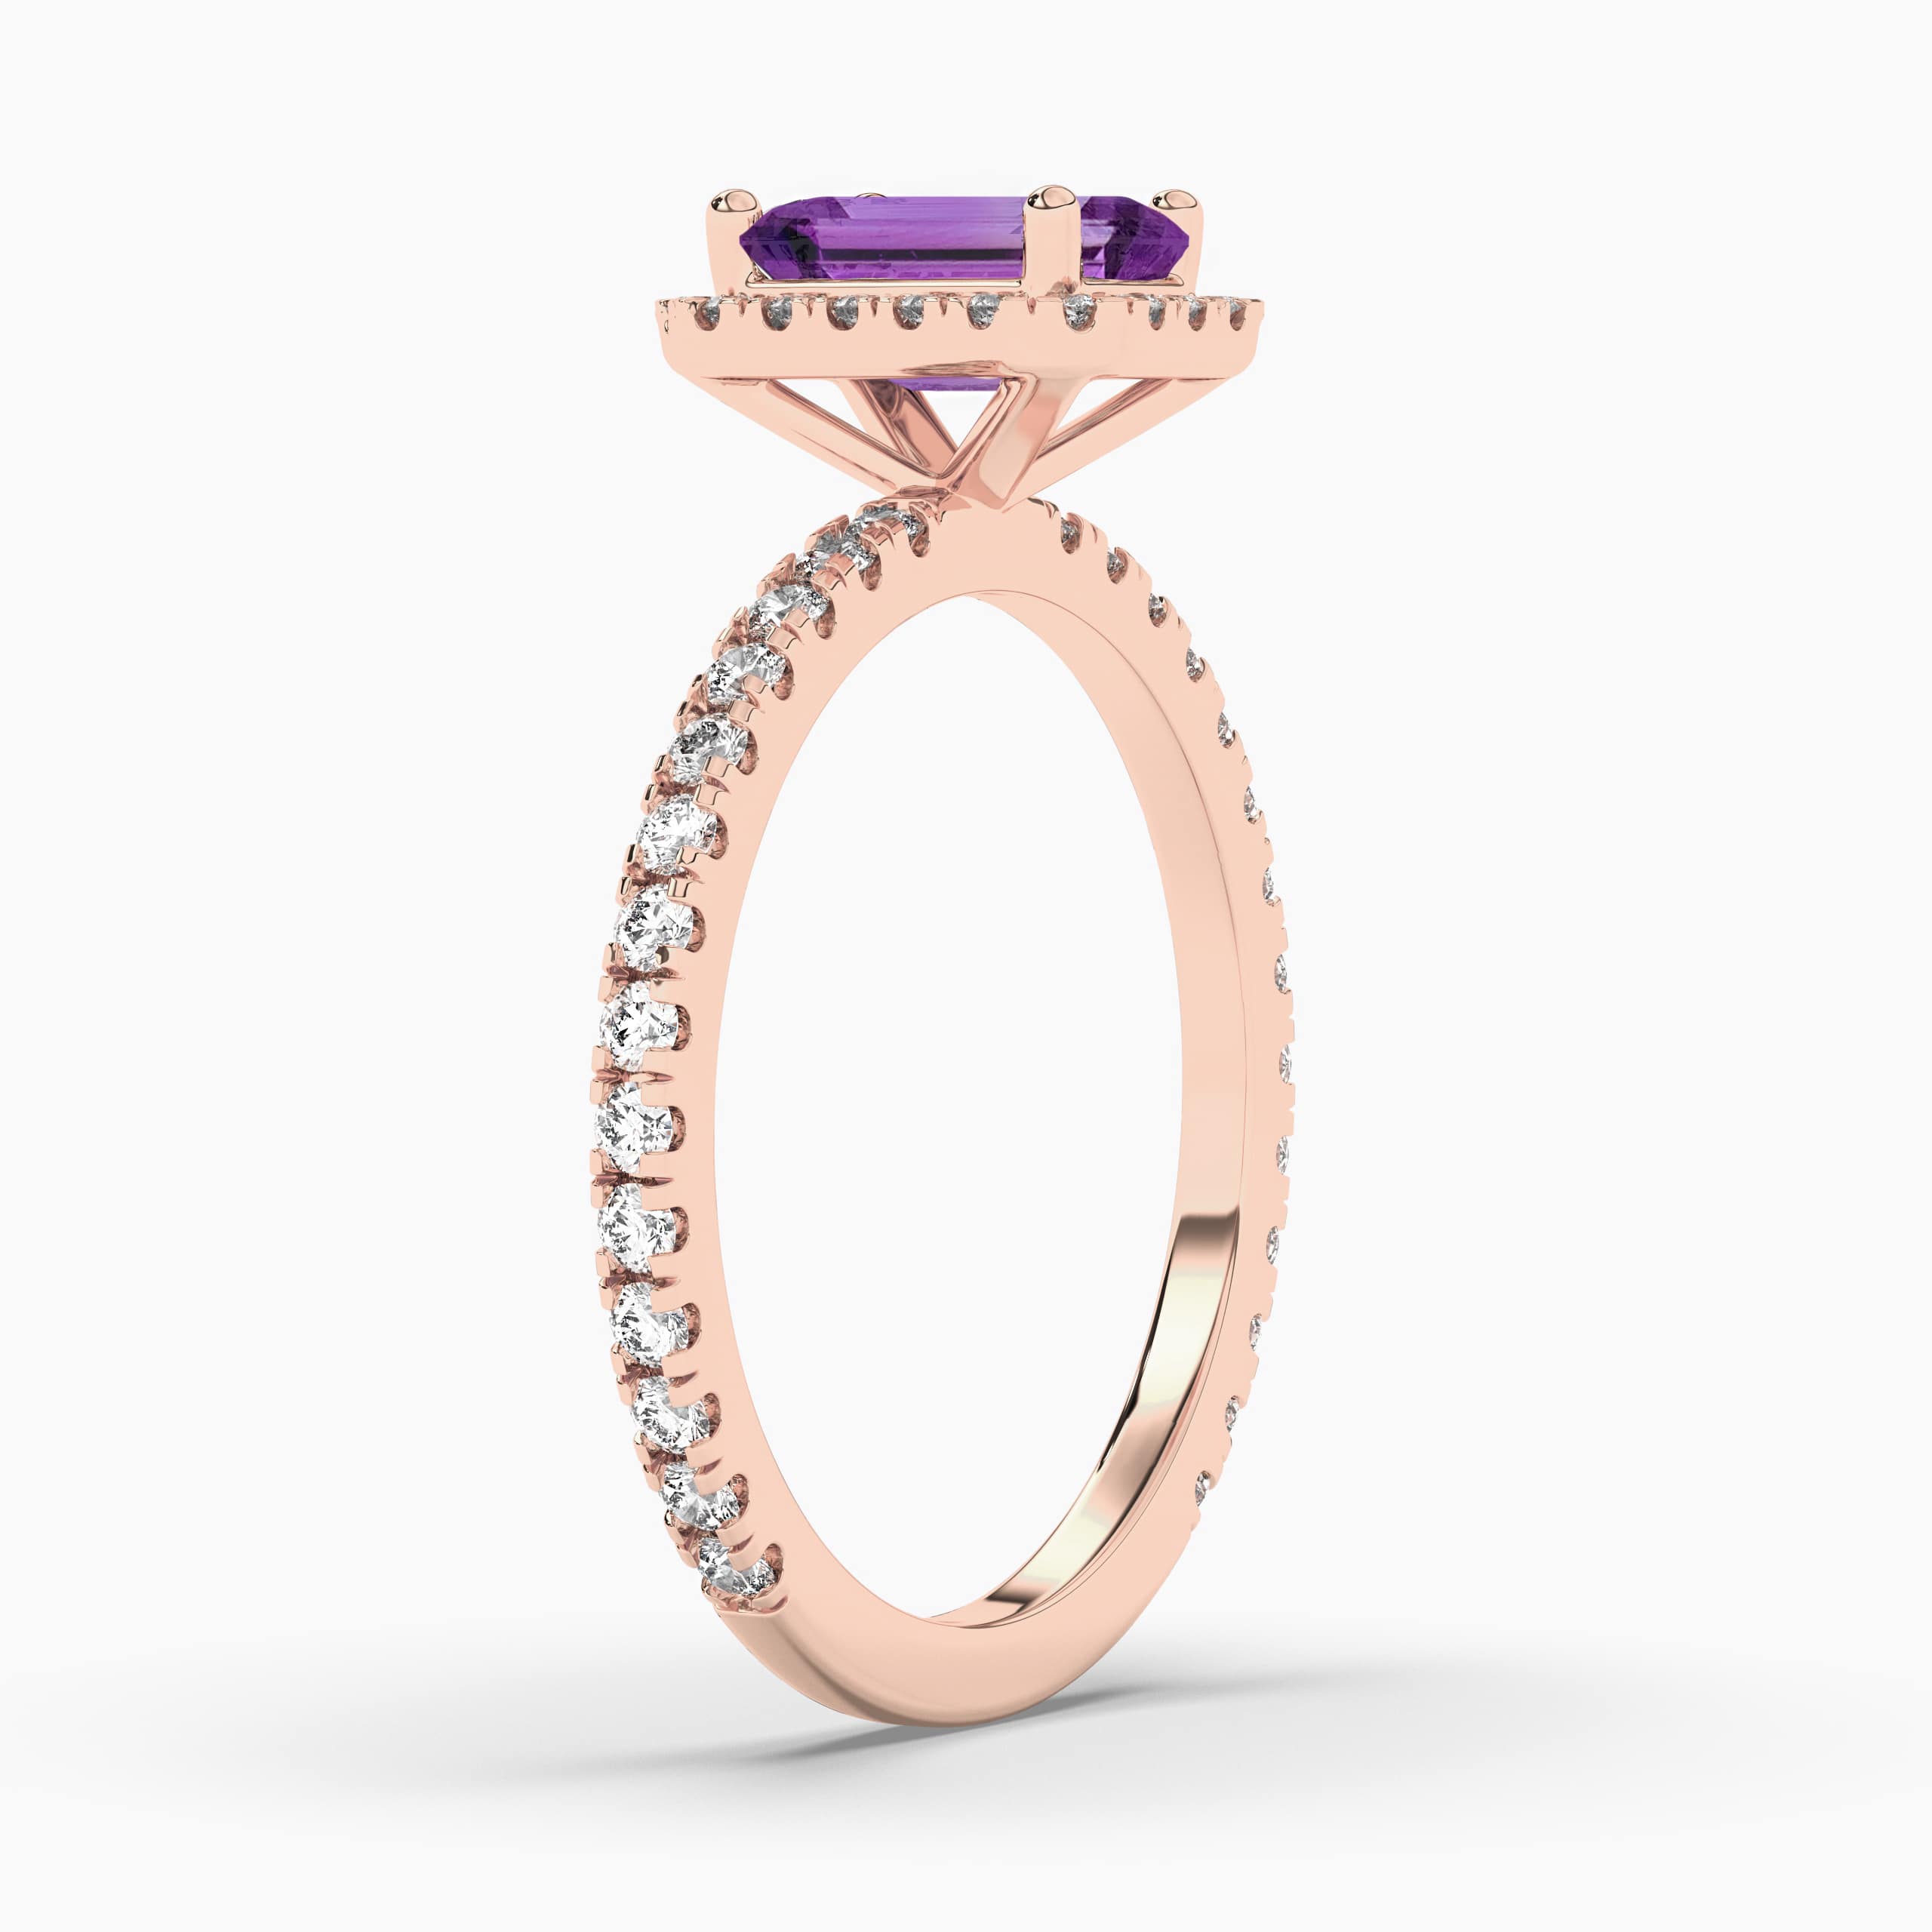 Emerald-Cut Amethyst and Diamond Ring in Rose Gold